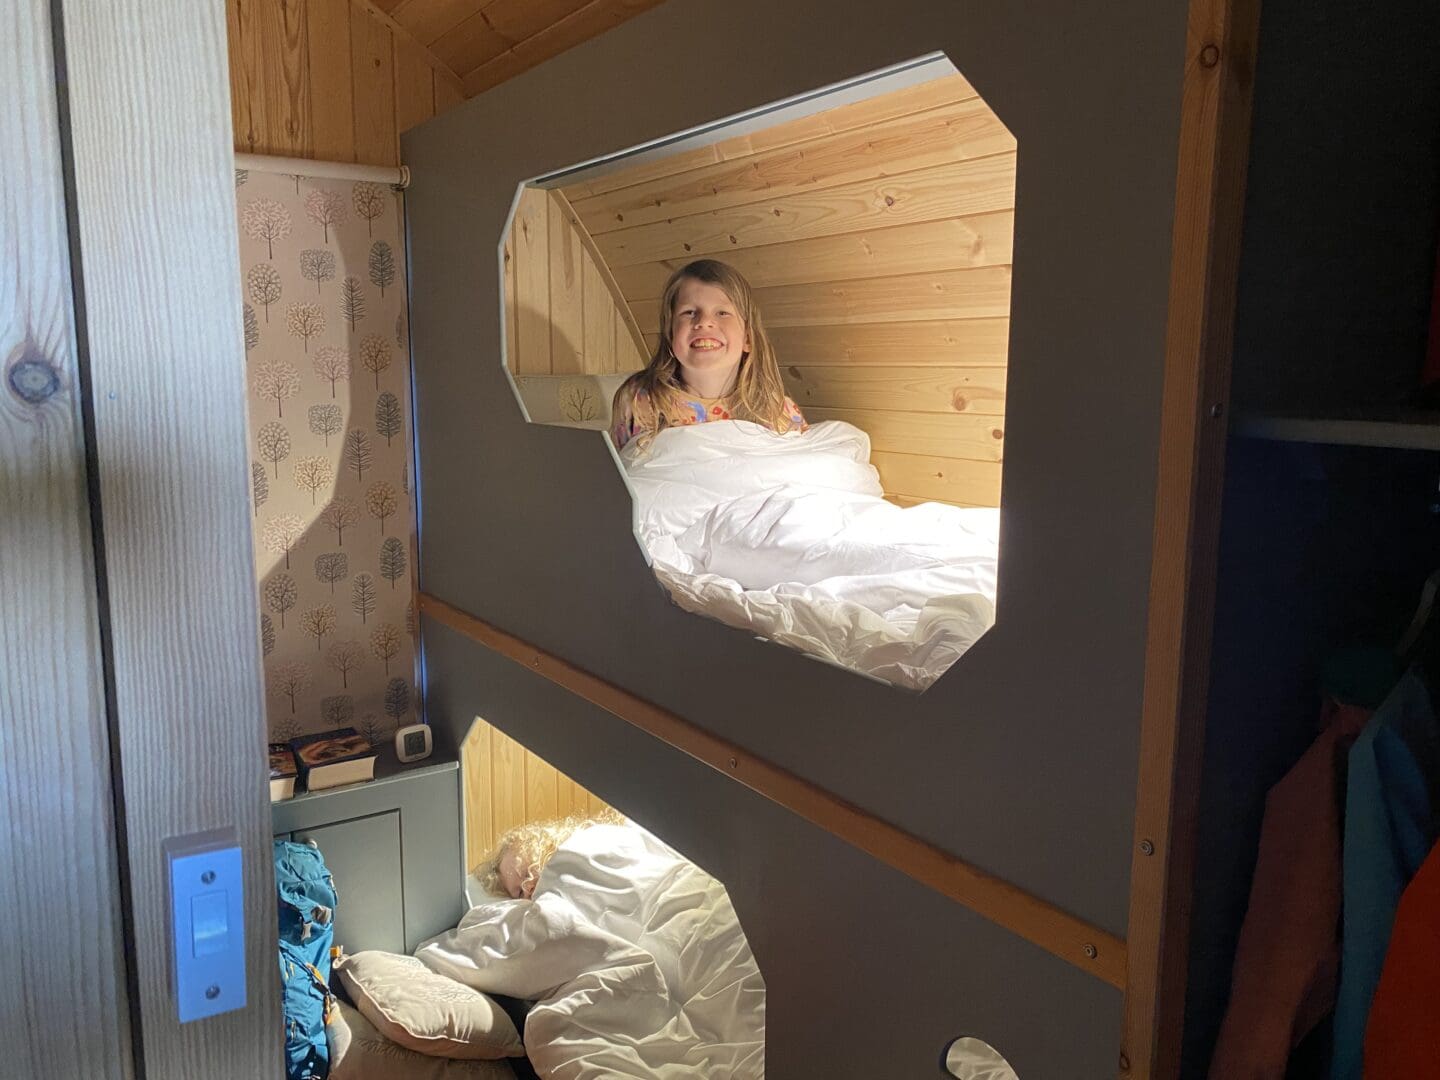 Children in glamping pod bunk beds